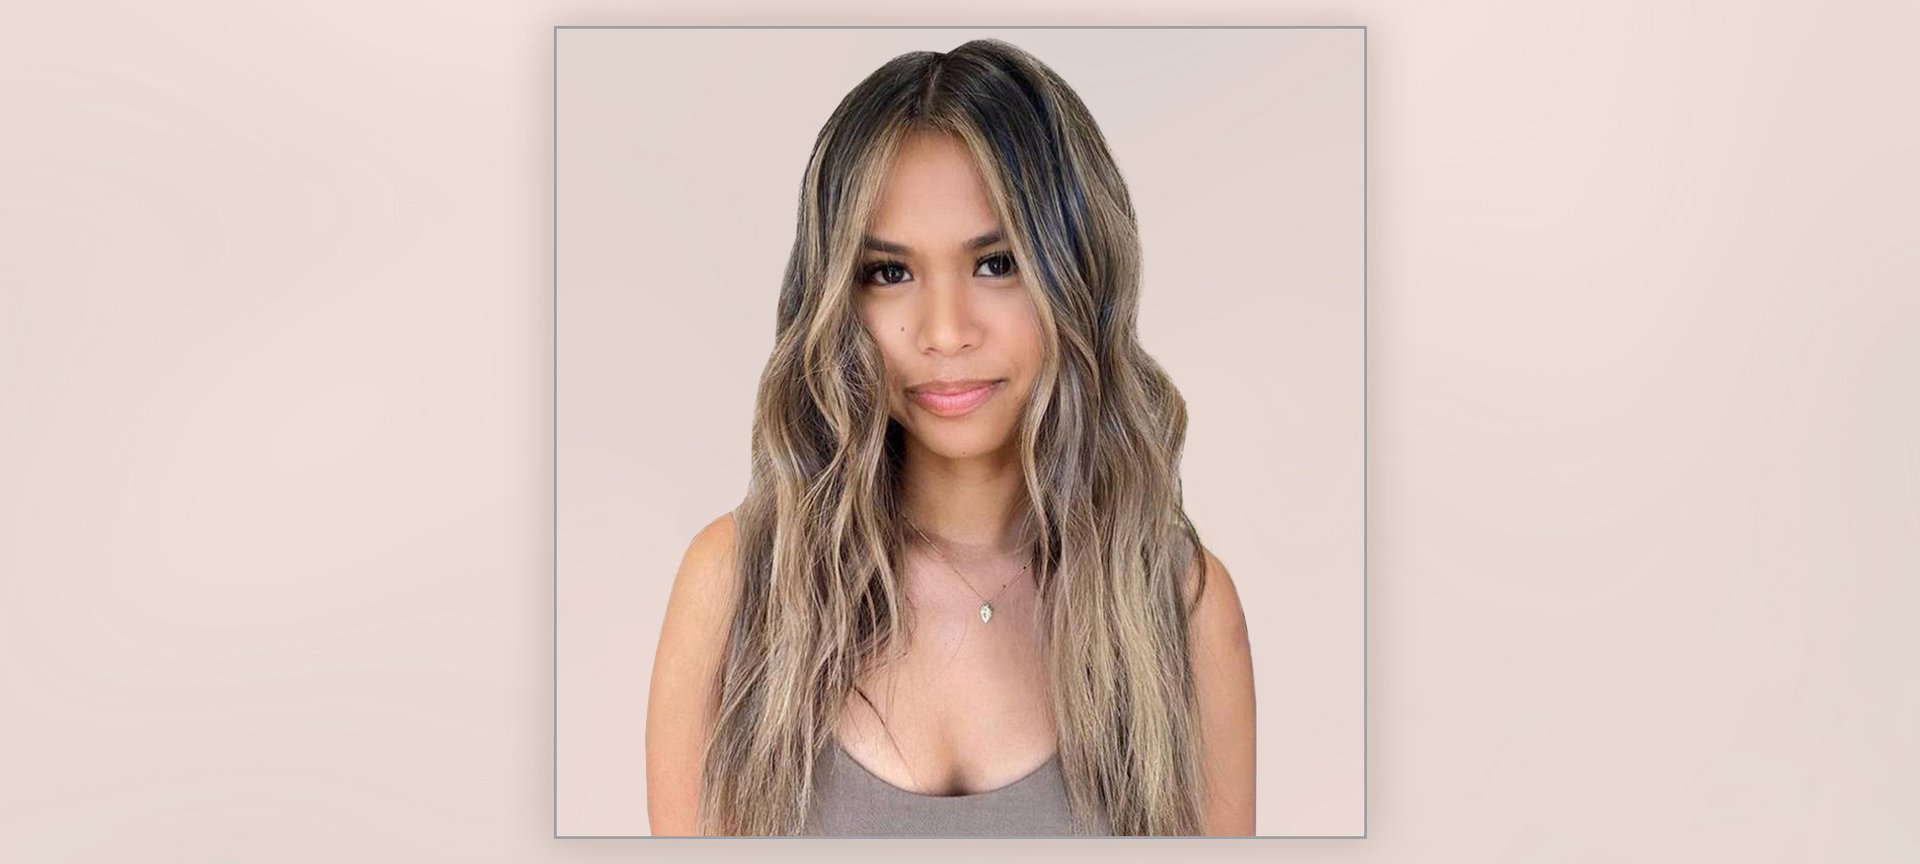 Balayage vs. Foils: The Colorist's Ultimate Guide to Highlighting